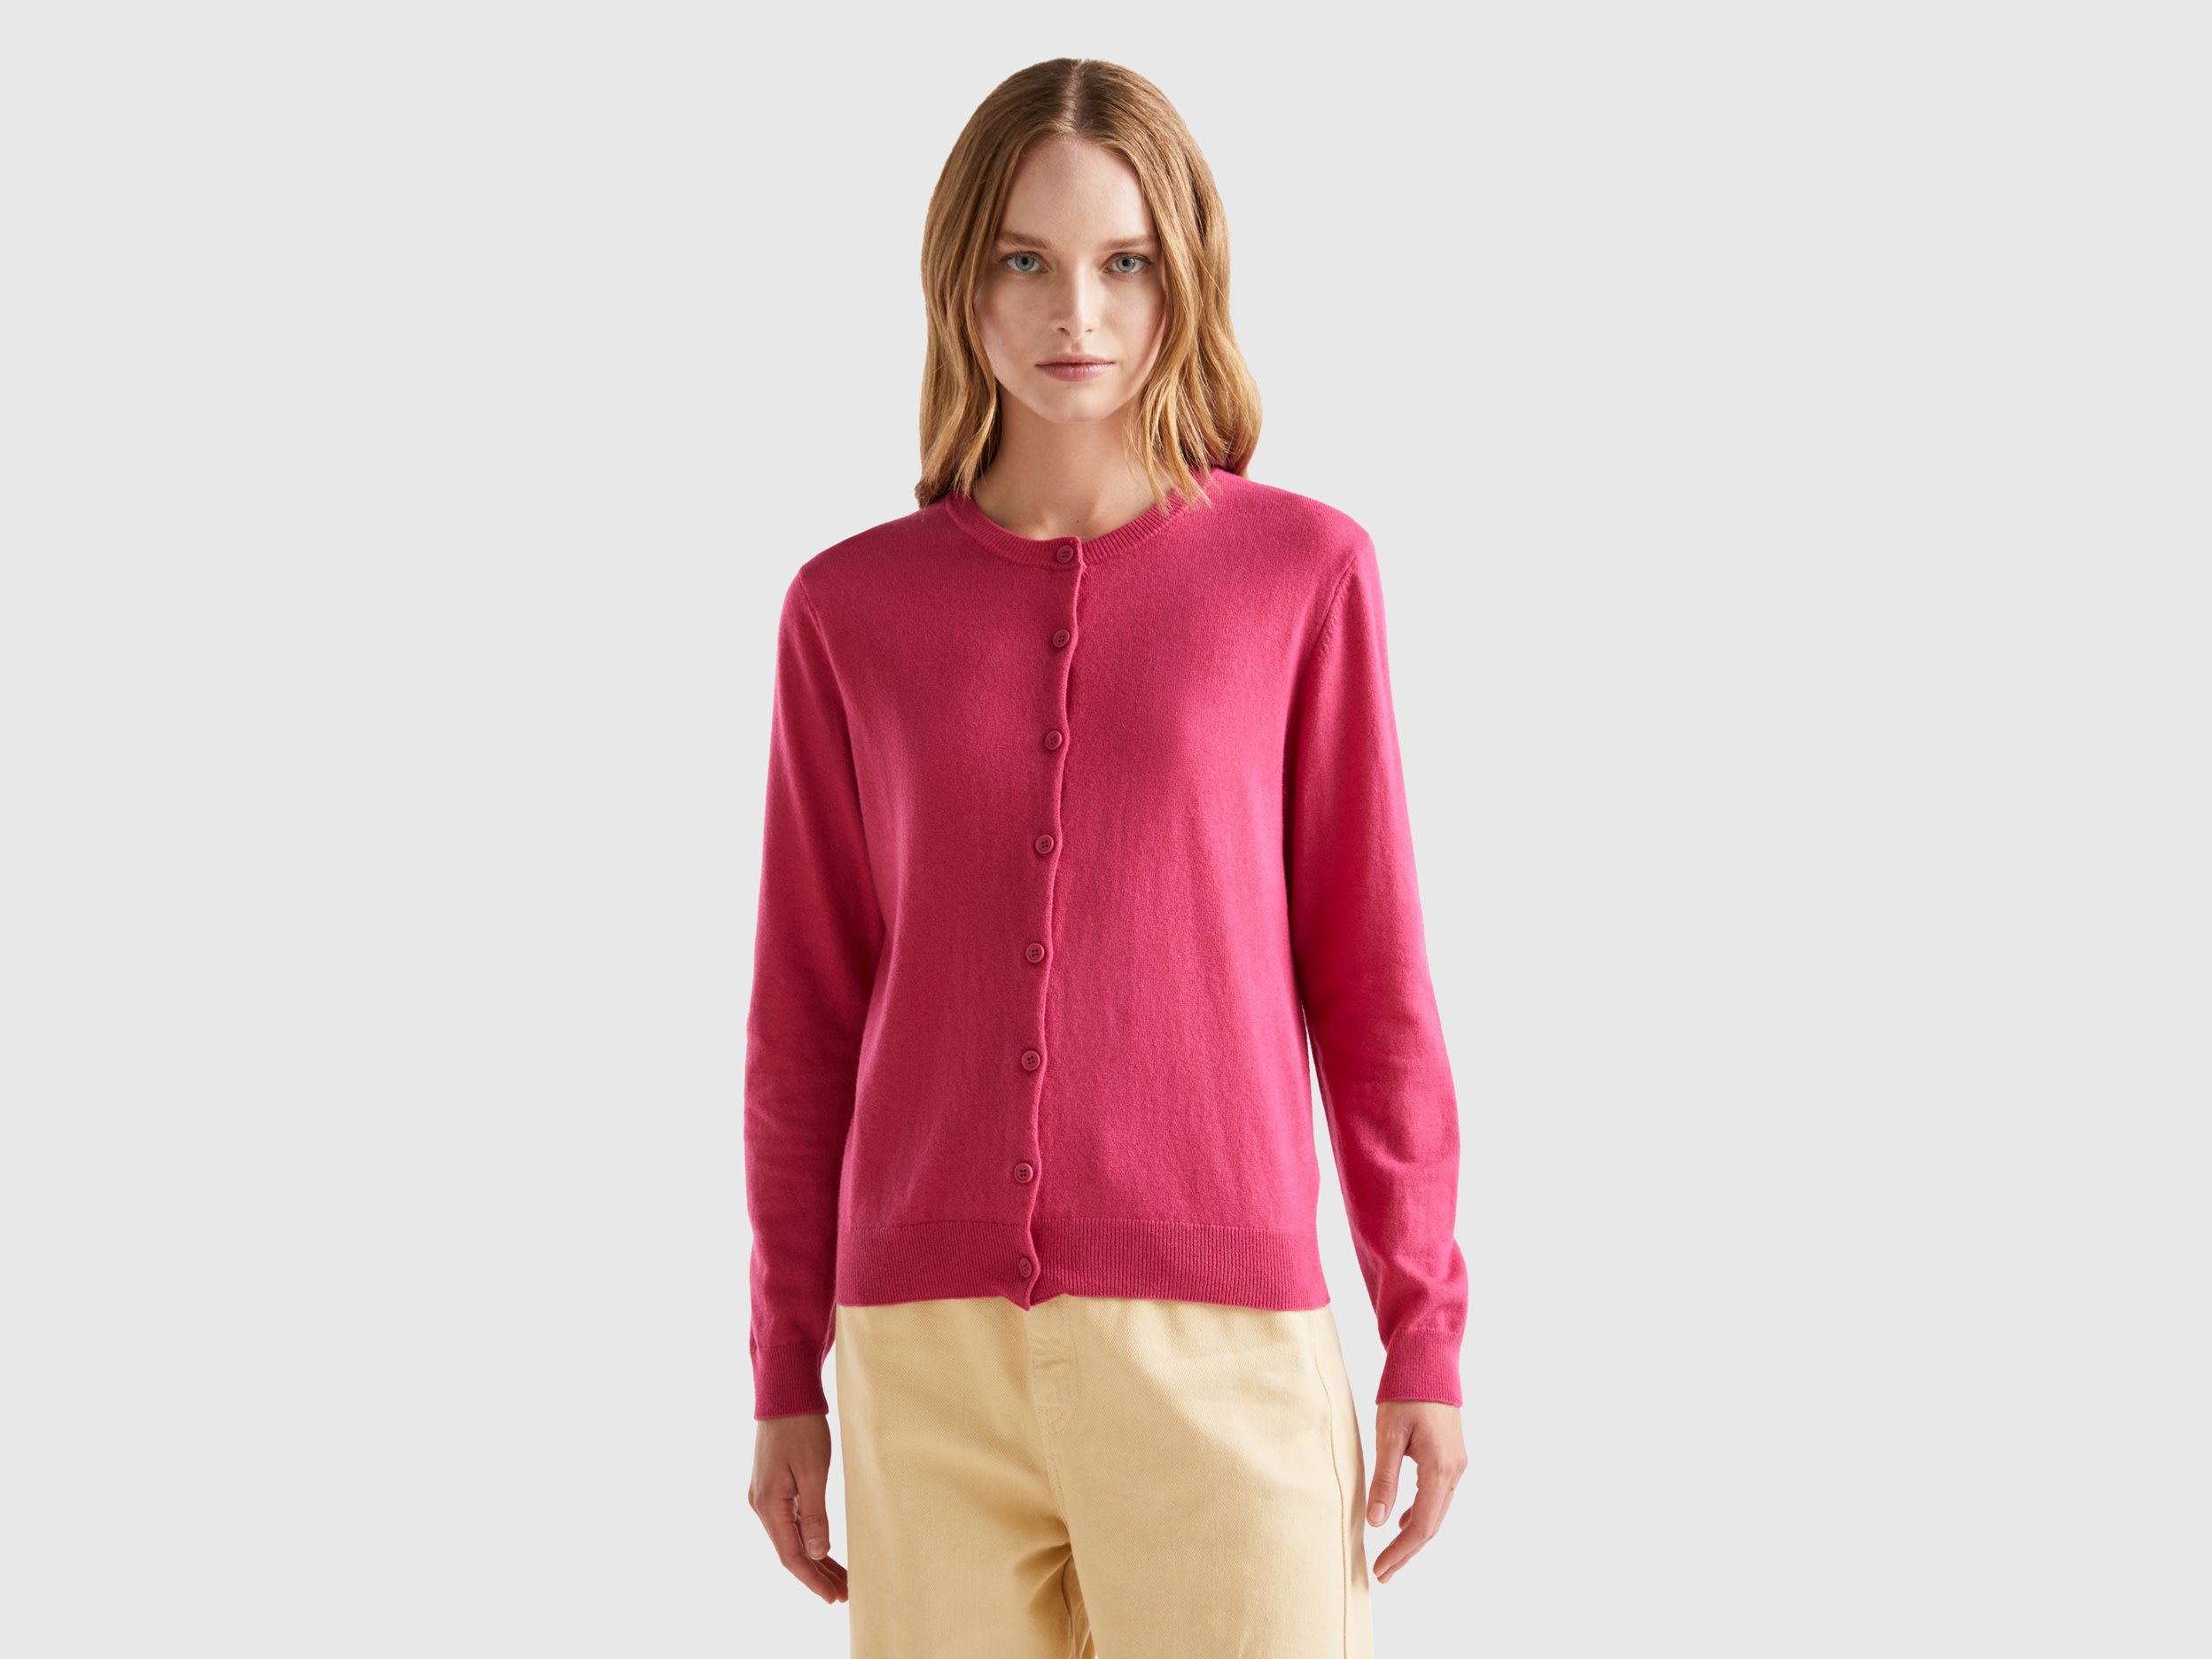 Benetton, Magenta Red Cardigan In Cashmere And Wool Blend, size S, Cyclamen, Women